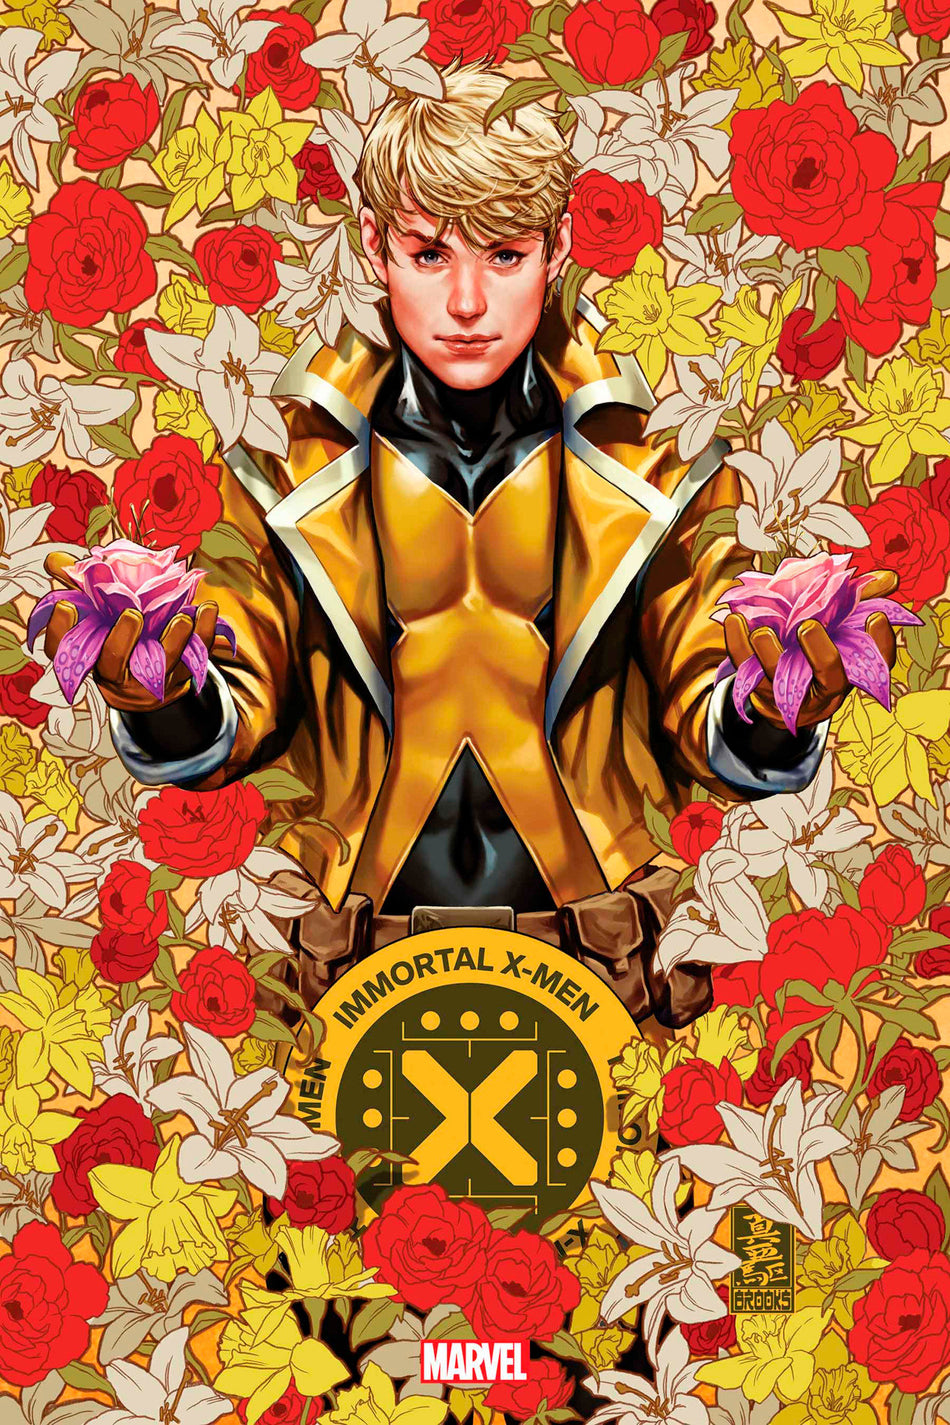 Stock Photo of Immortal X-Men 13 comic sold by Stronghold Collectibles